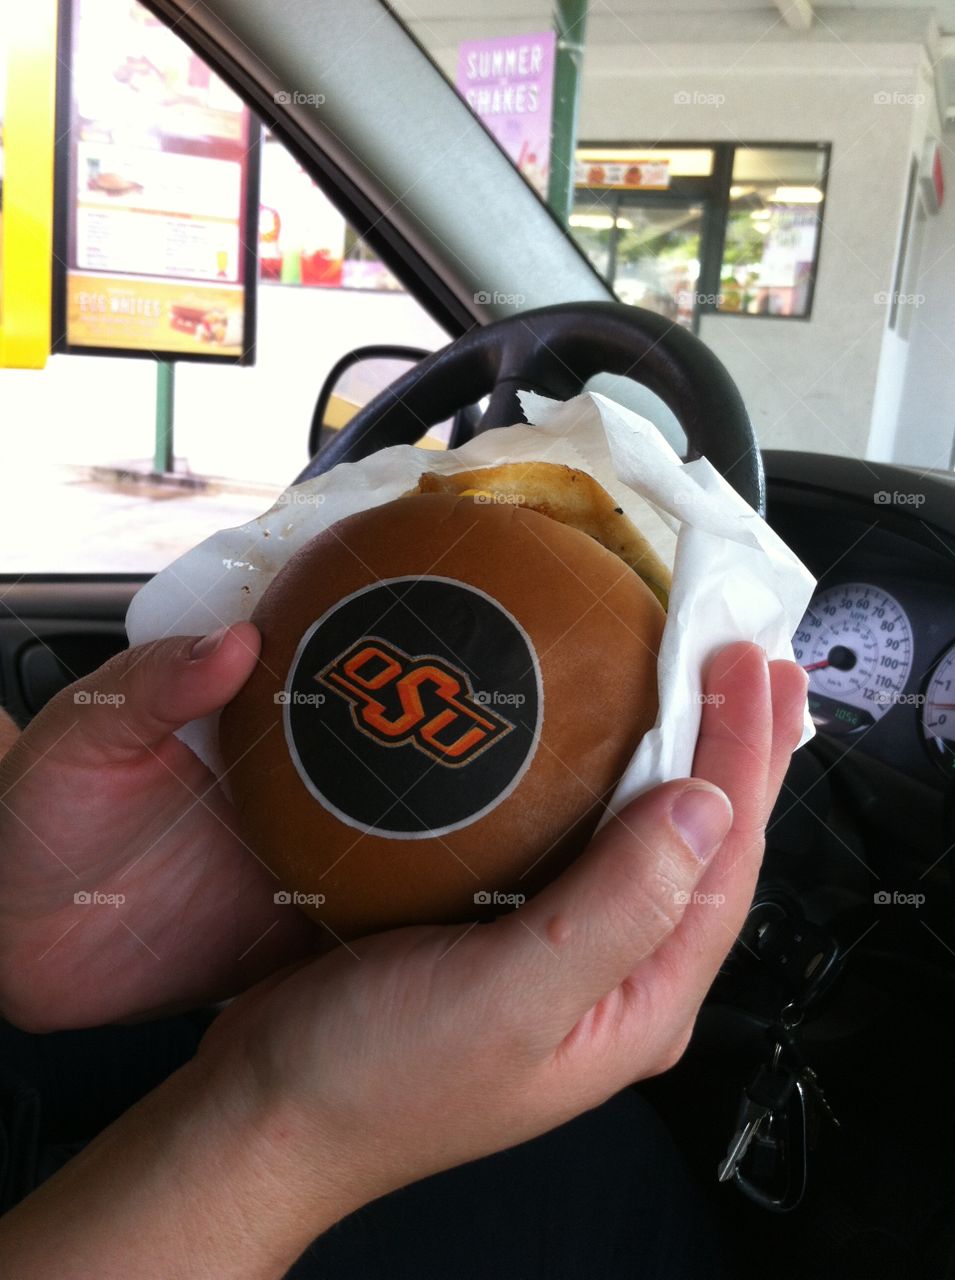 Oklahoma State Burger. Sonic was randomly putting the emblems of the two largest universities in Oklahoma on the burger buns. 